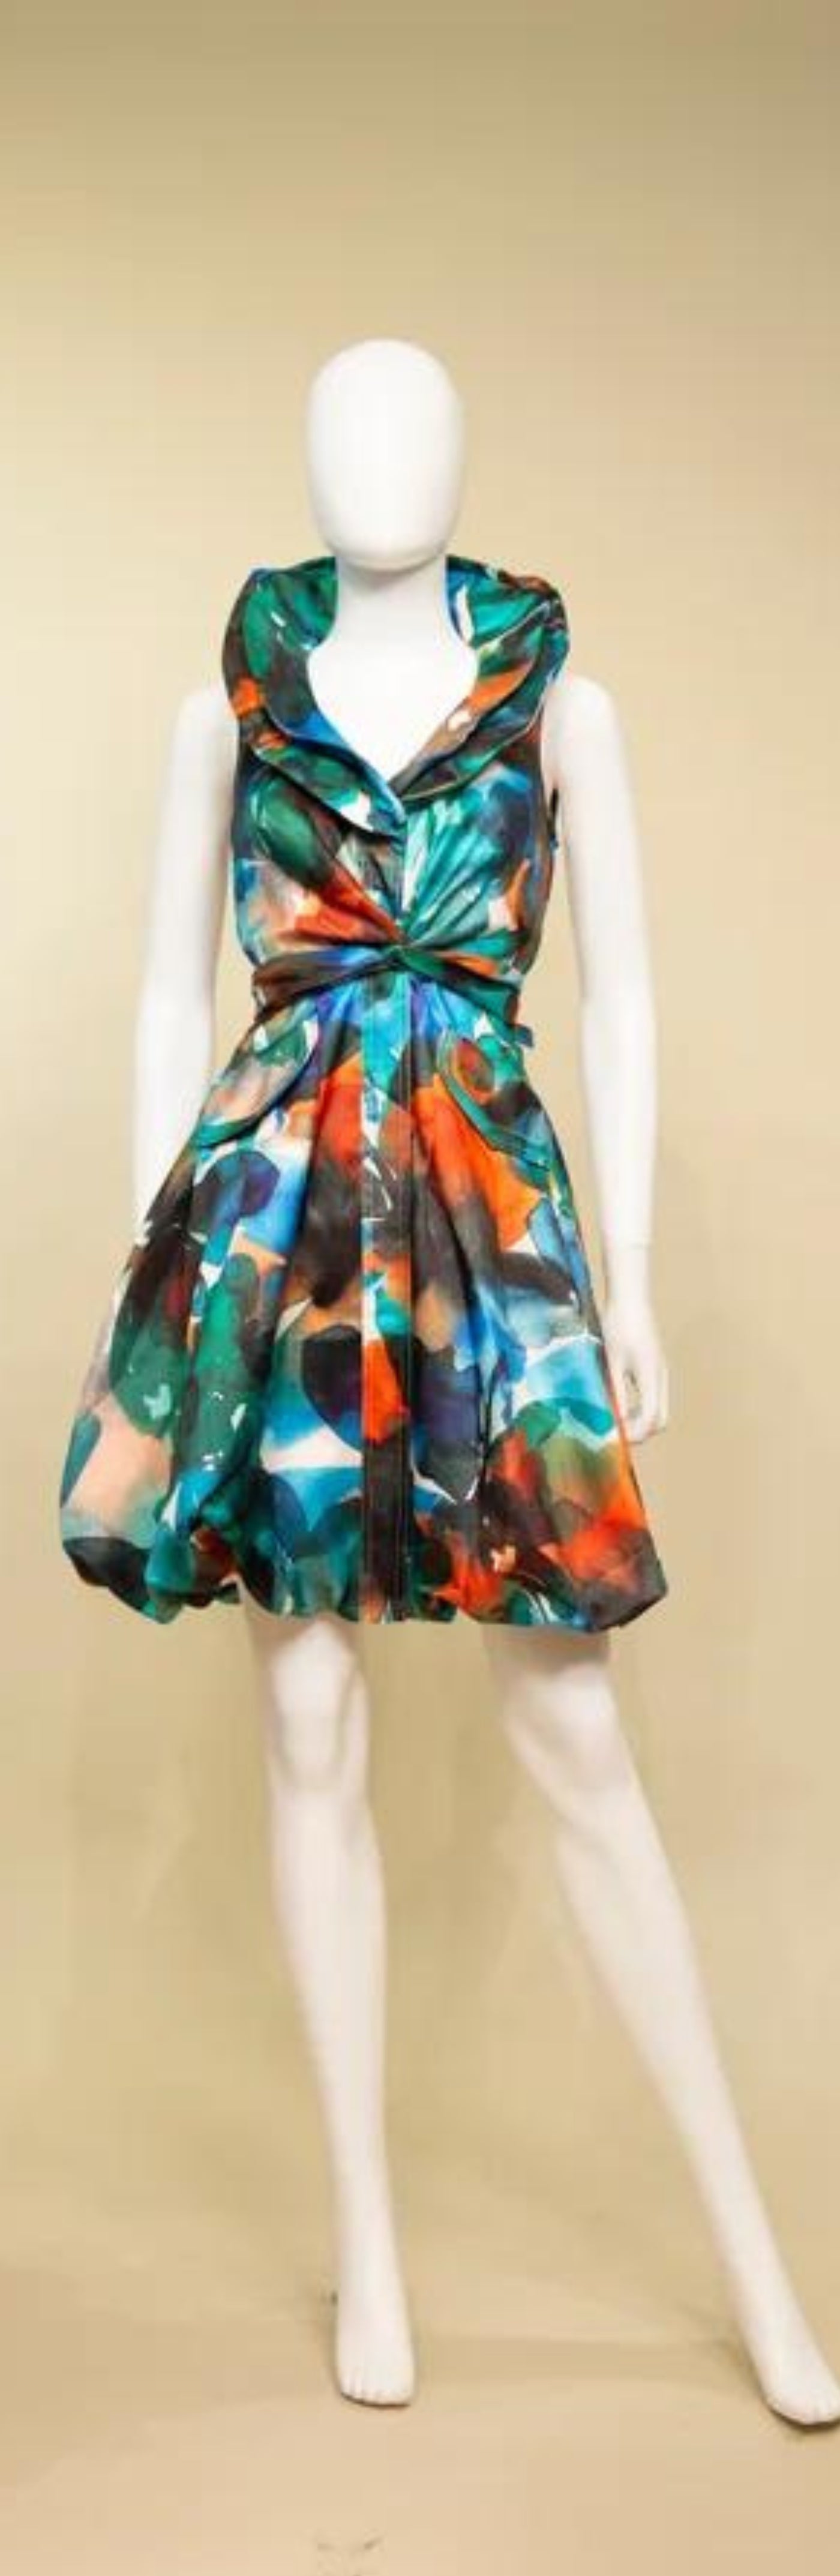 Samuel Dong's Print Double Collared Bubble Dress